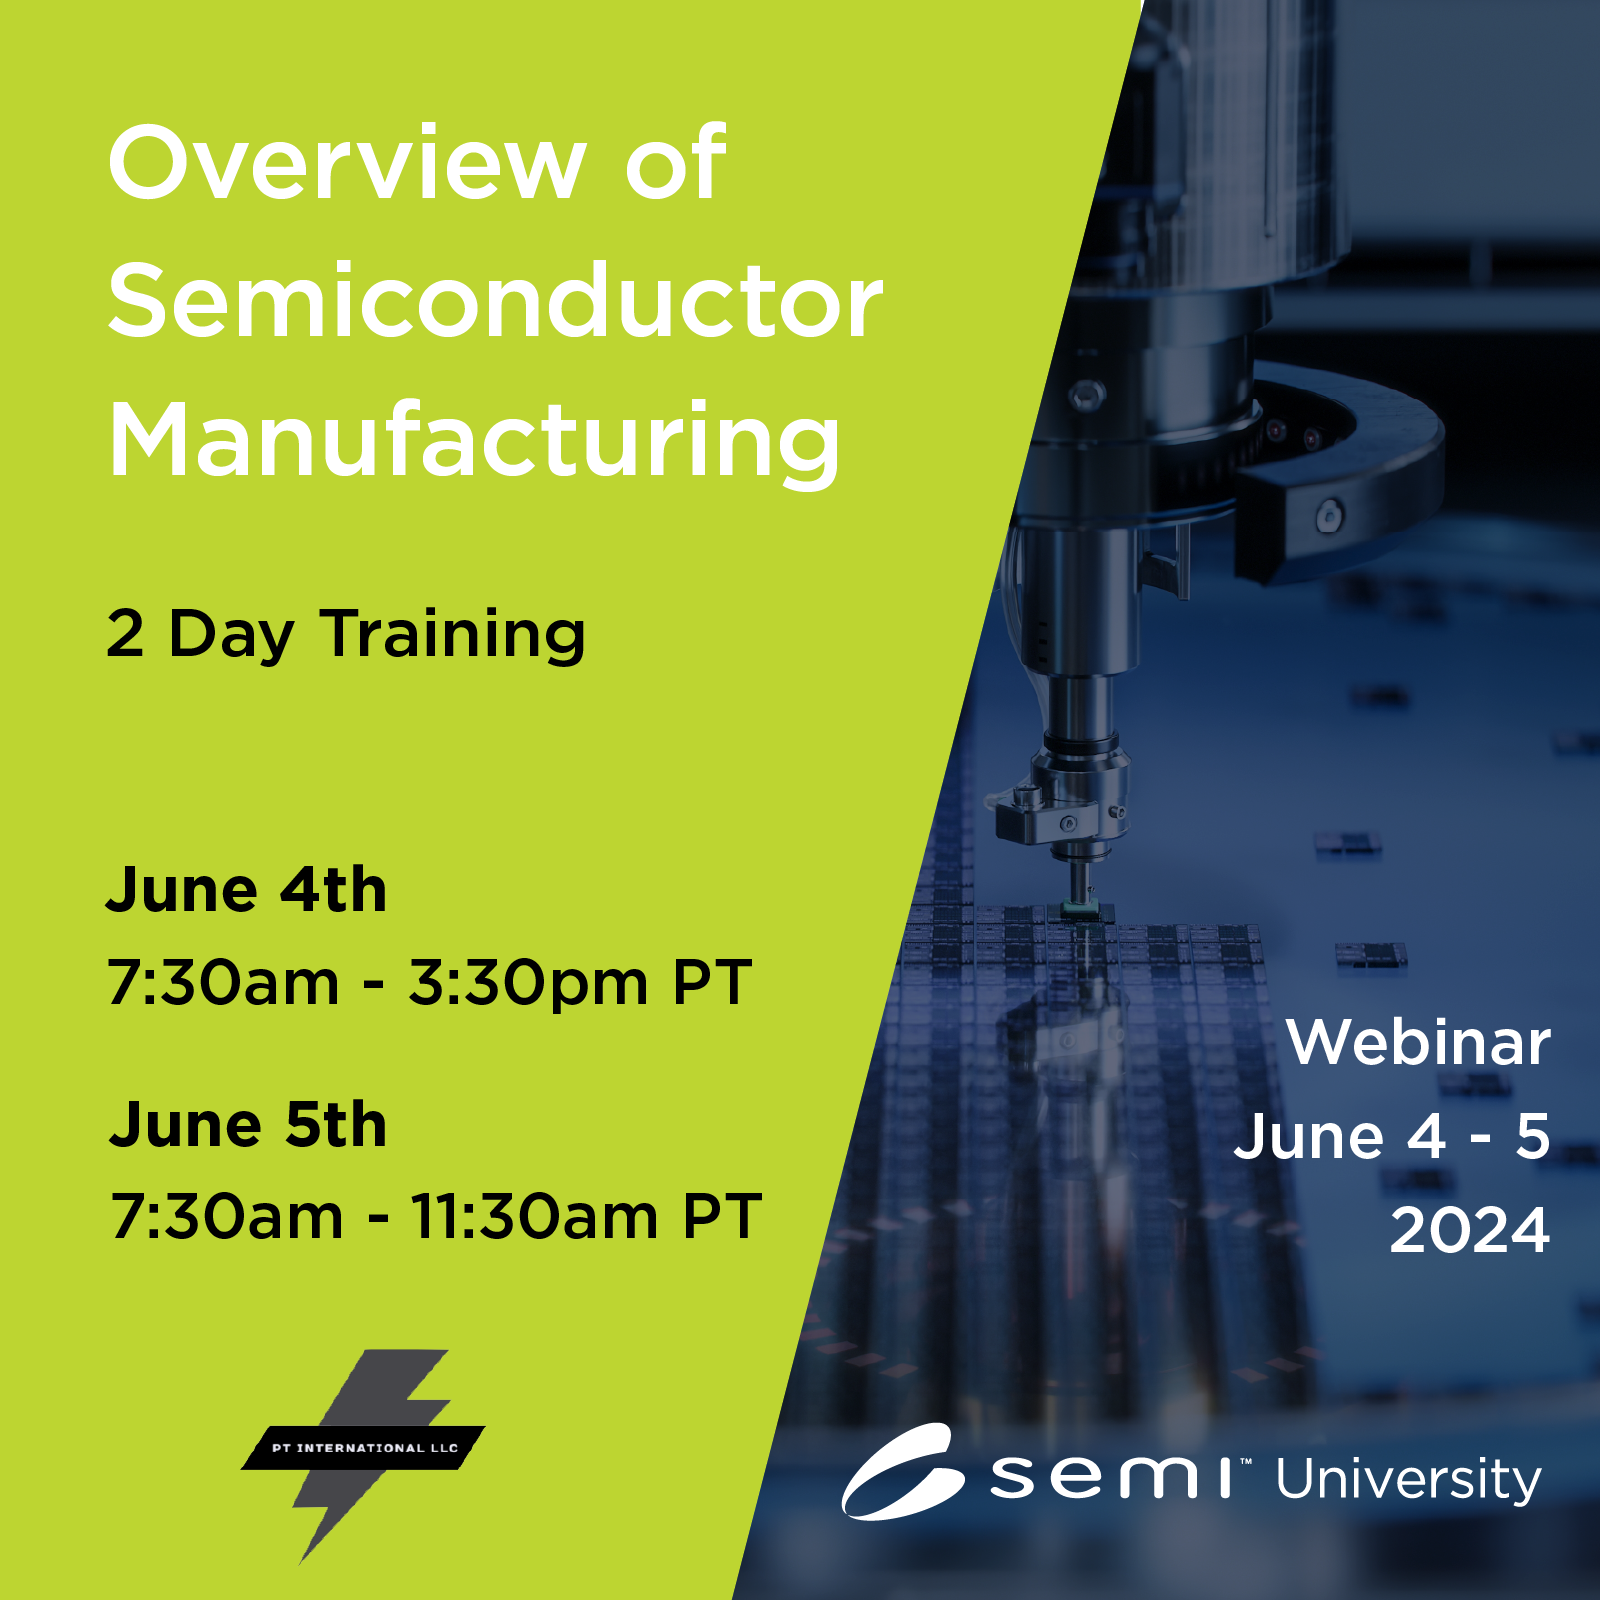 Overview of Semiconductor Manufacturing June 2024